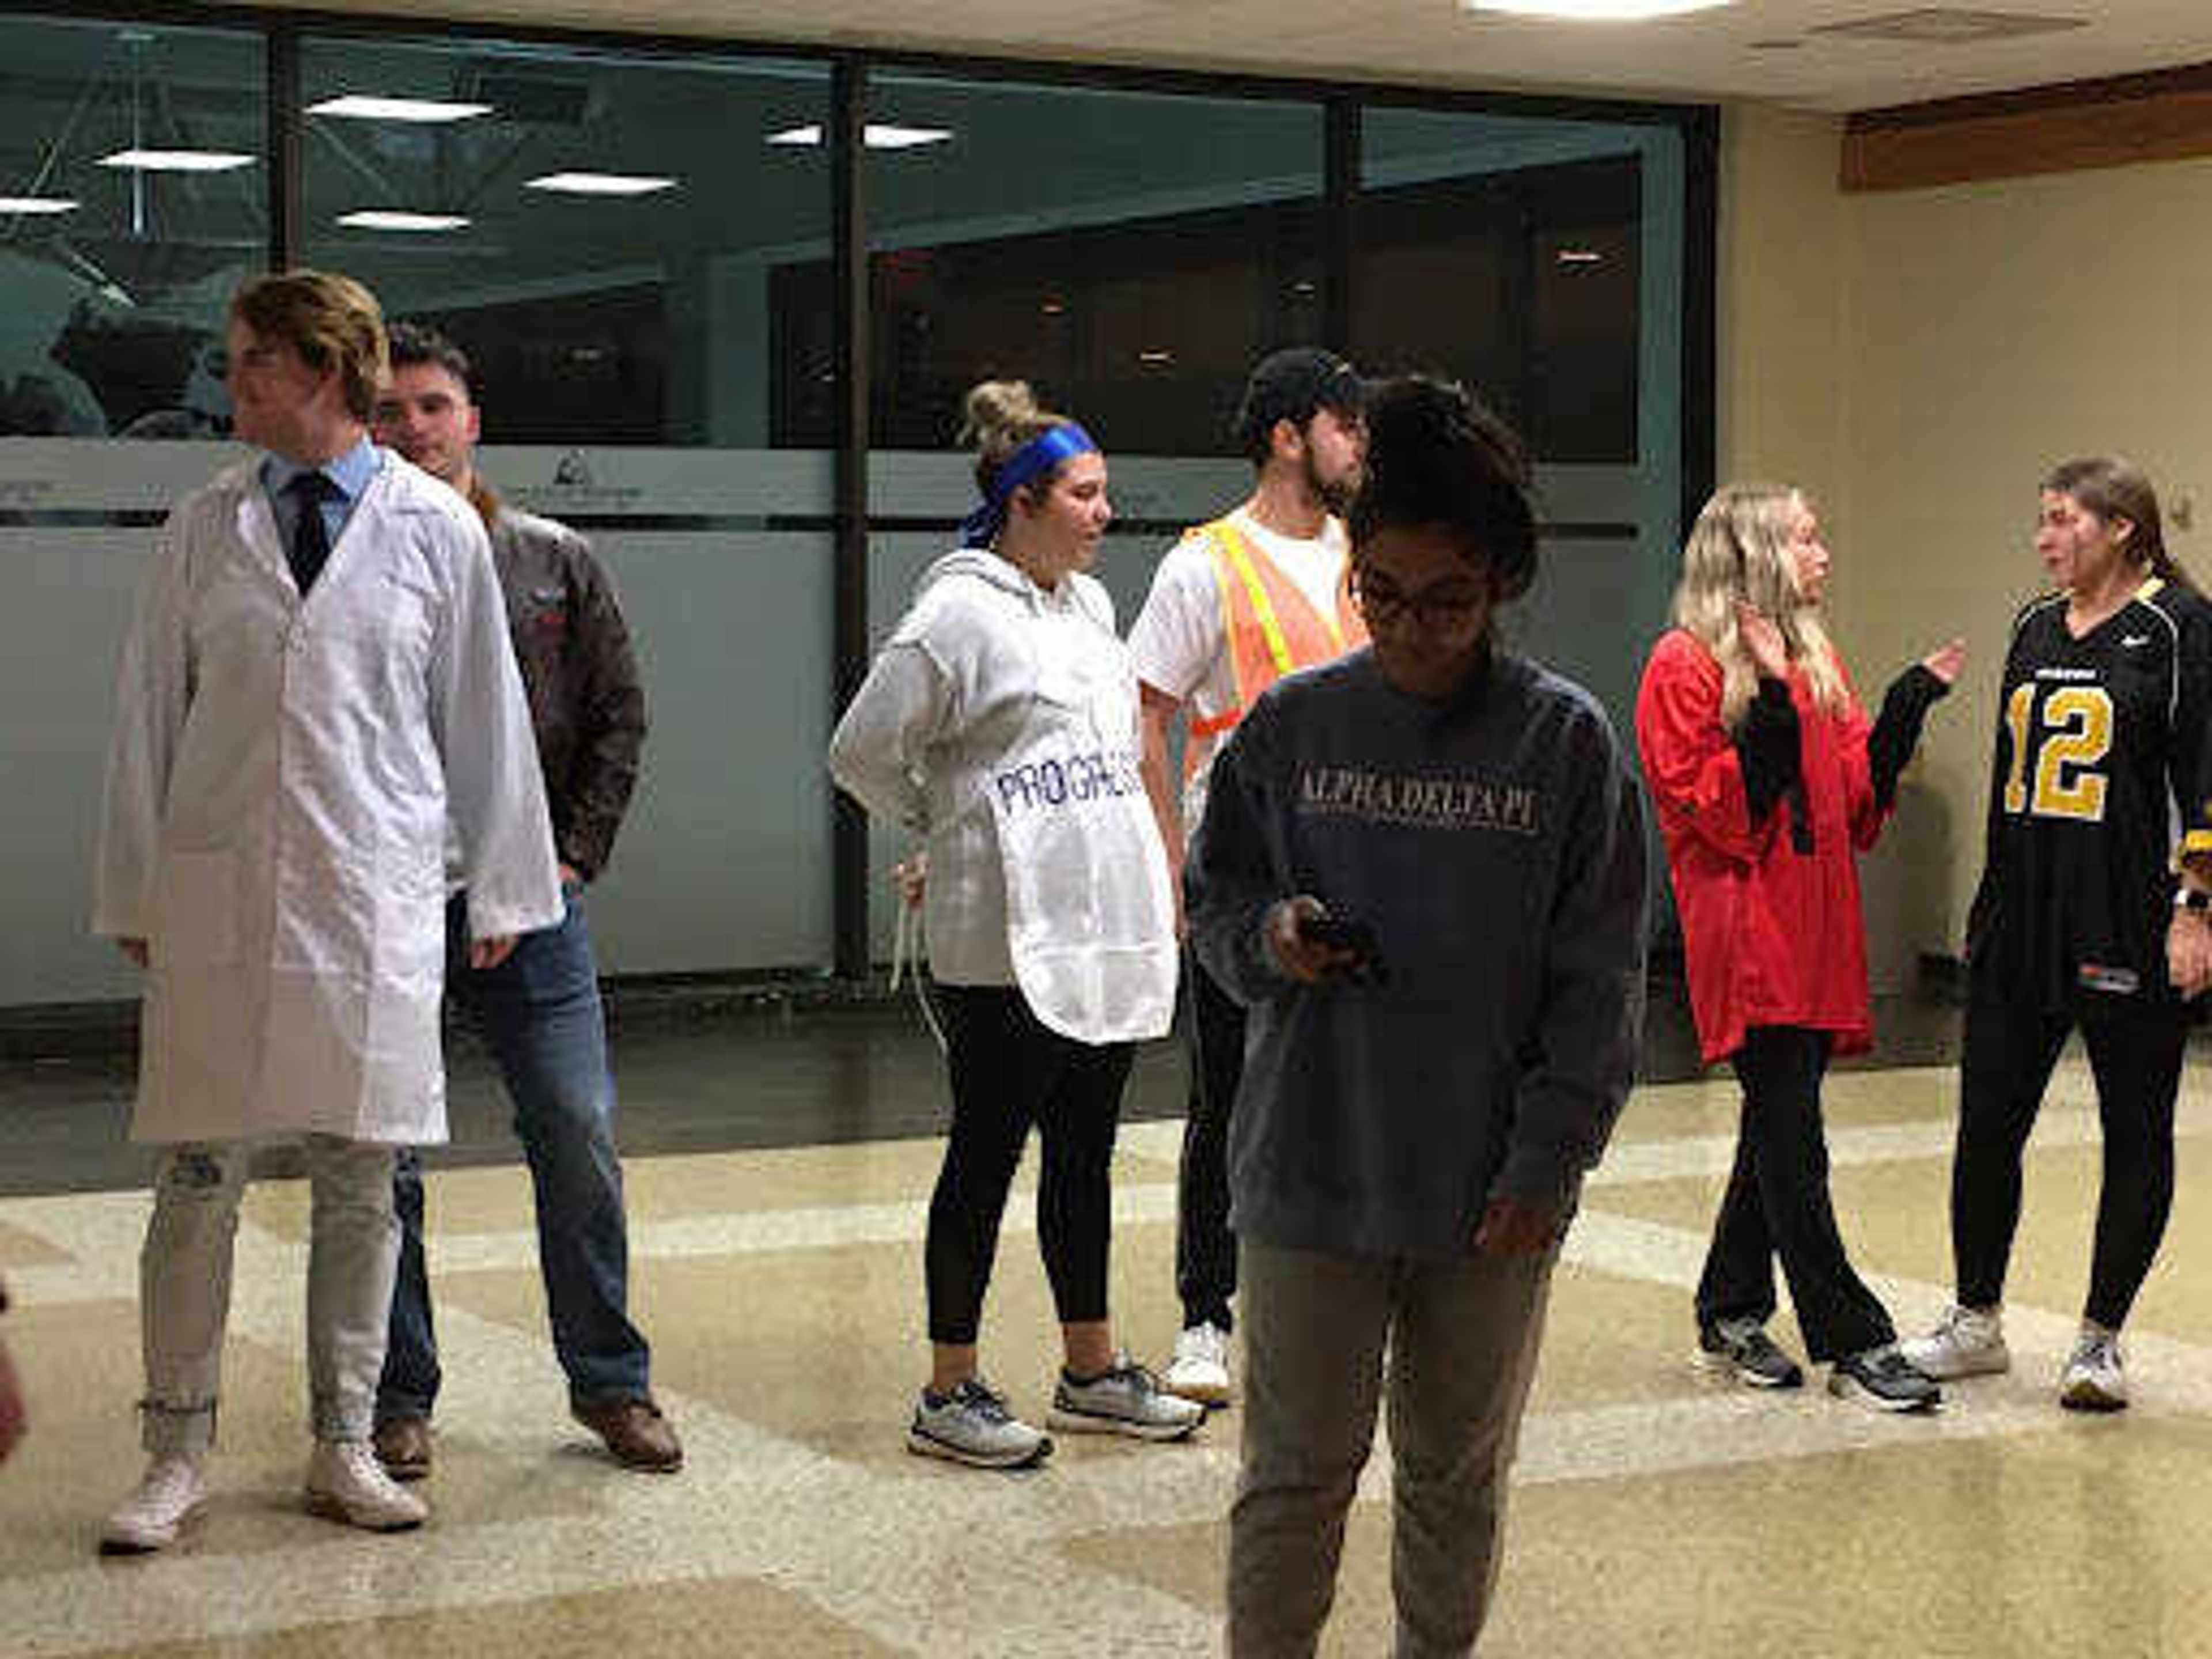 SGA members mingle after the Nov. 1 meeting, many in costume to celebrate Halloween.